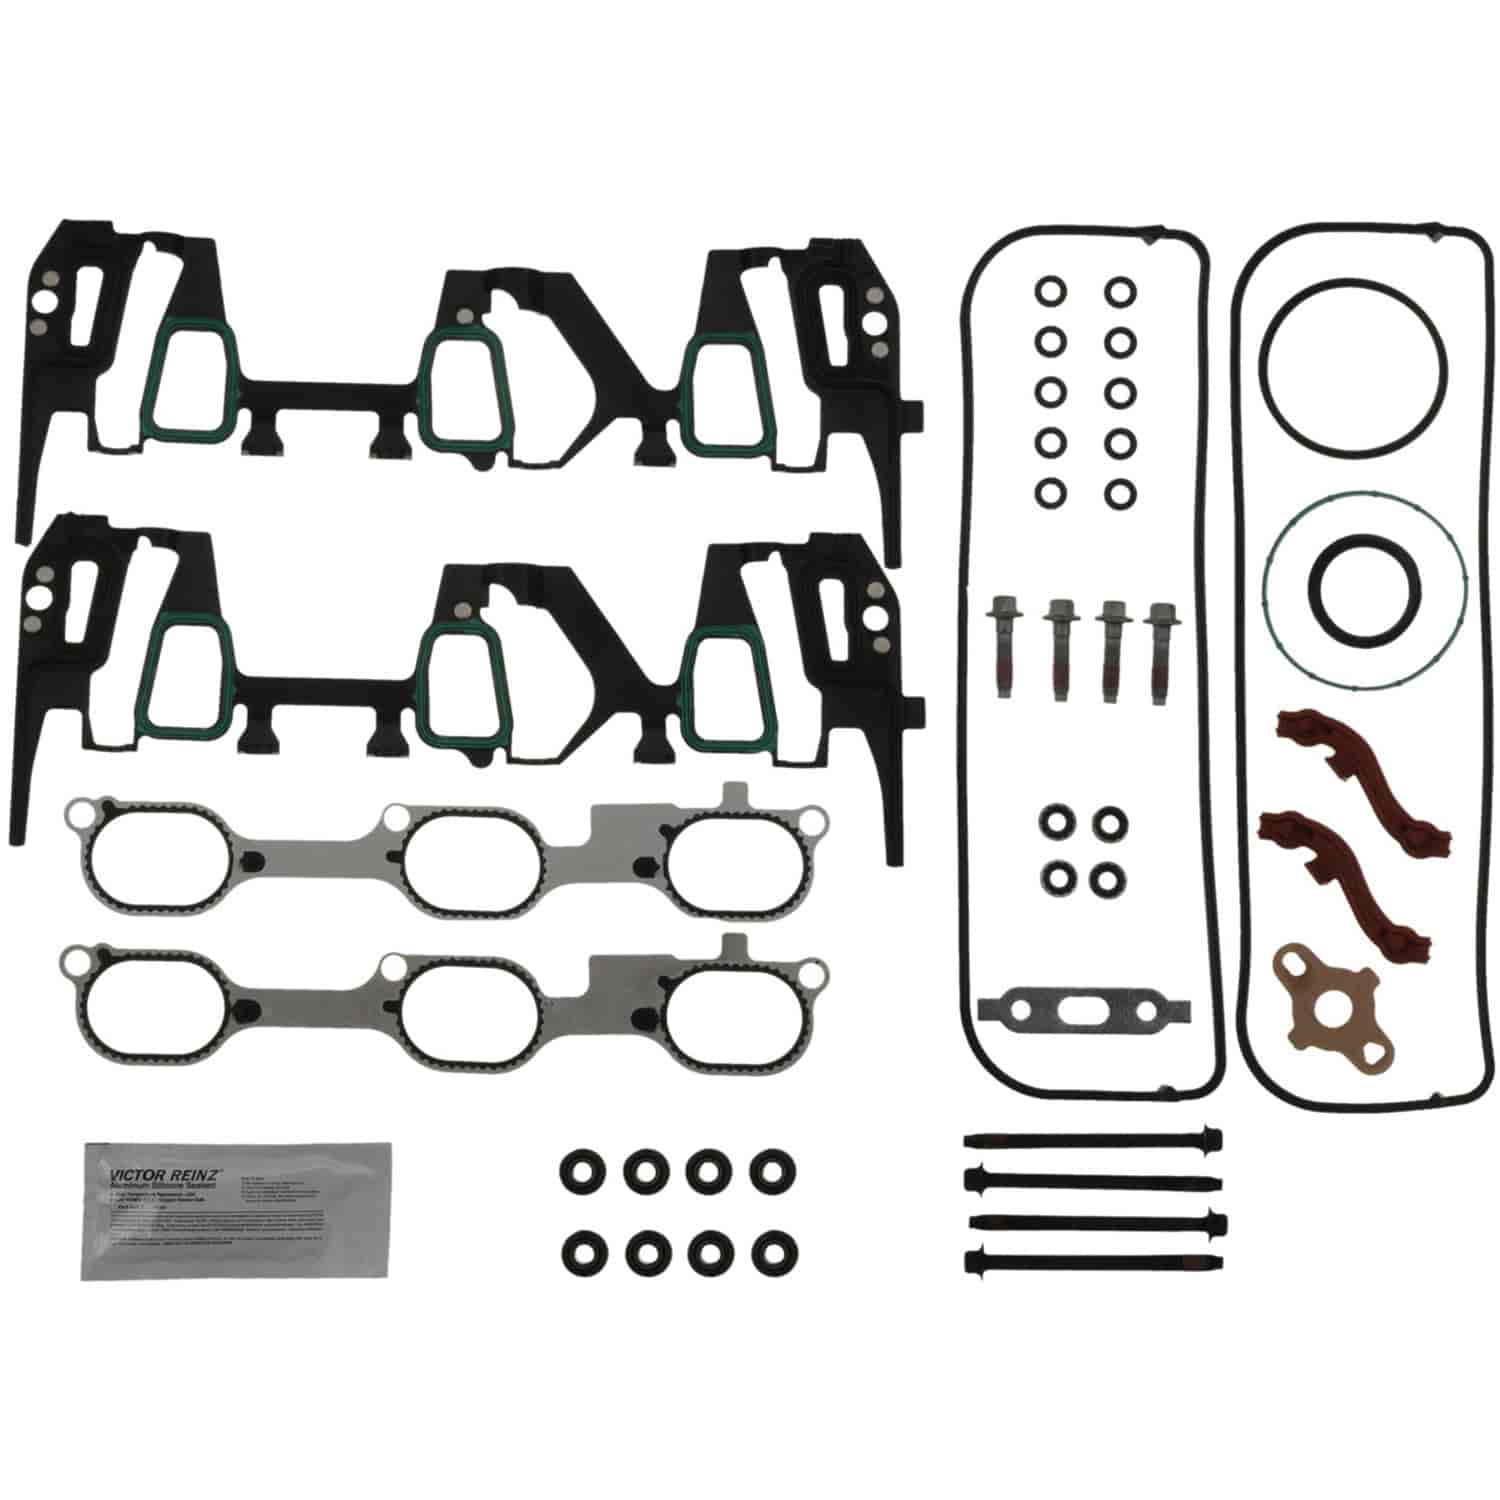 Intake Manifold Installation Kit 2005-2008 Chevy Equinox/Pontiac Torrent with V6 3.4L Includes Intake Bolts